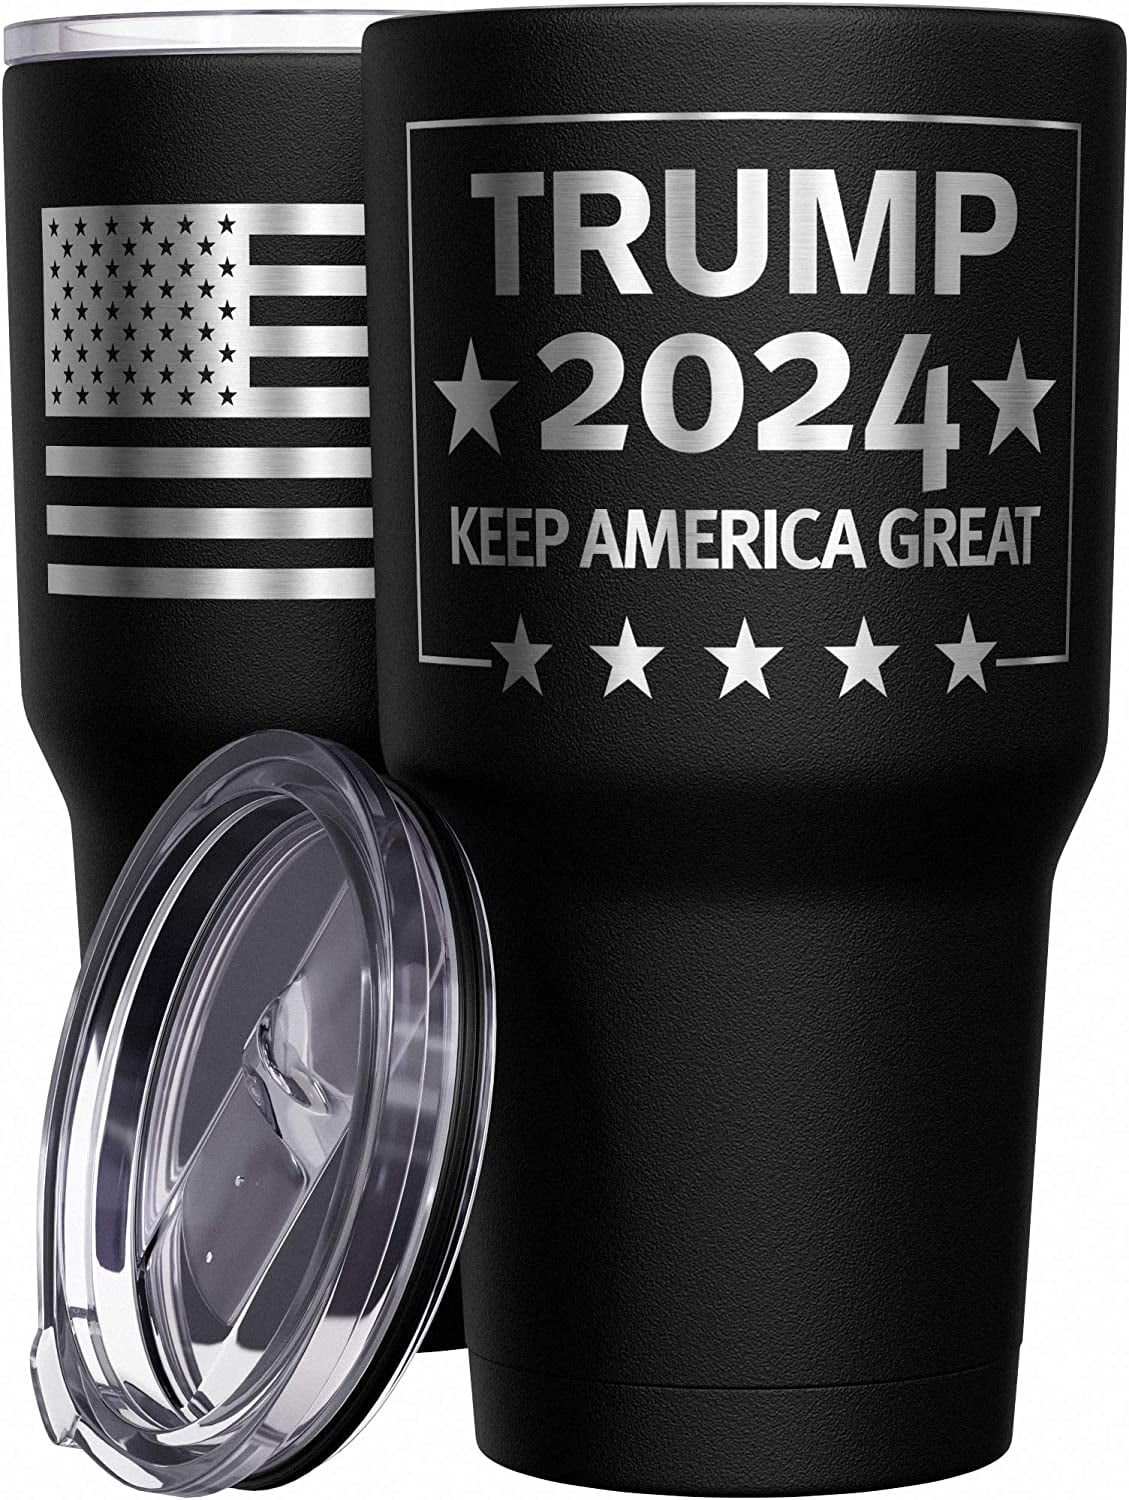  Trump 2024 Beer Can Insulator - Donald Trump MAGA Save America,  Make Liberals Cry Again,Four More Years of Liberal Tears,Insulated Cooler  Sleeve American Patriotic Gift for 16 oz. Tallboy Cans: Home